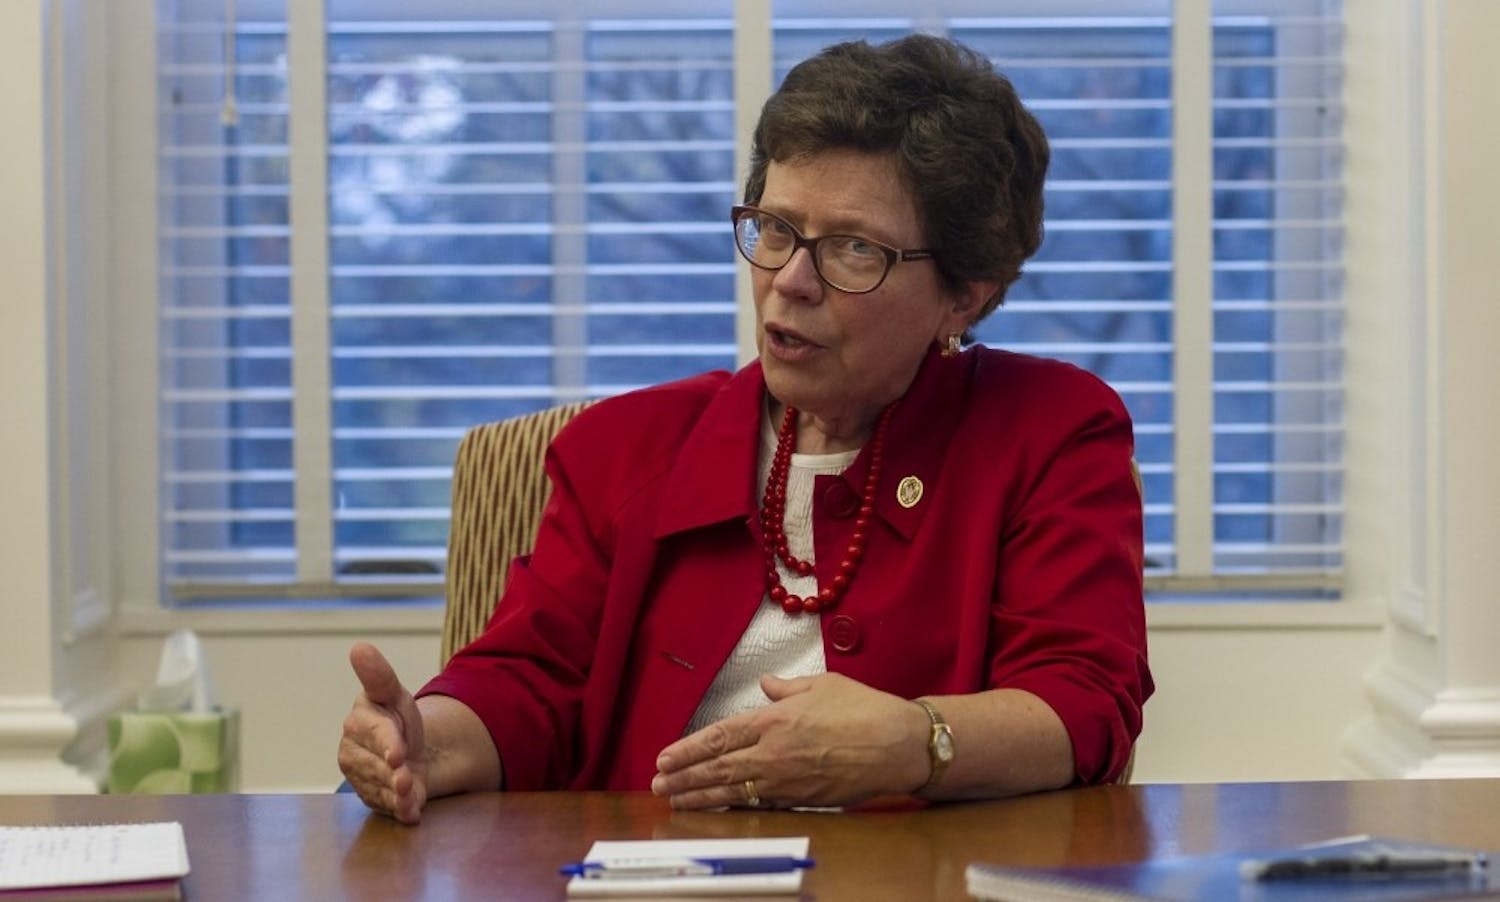 Chancellor Rebecca Blank said UW-Madison will continue to monitor how the Trump administration’s new order to bar immigrant individuals from the U.S. will affect UW-Madison students, faculty and staff in a statement released Monday.